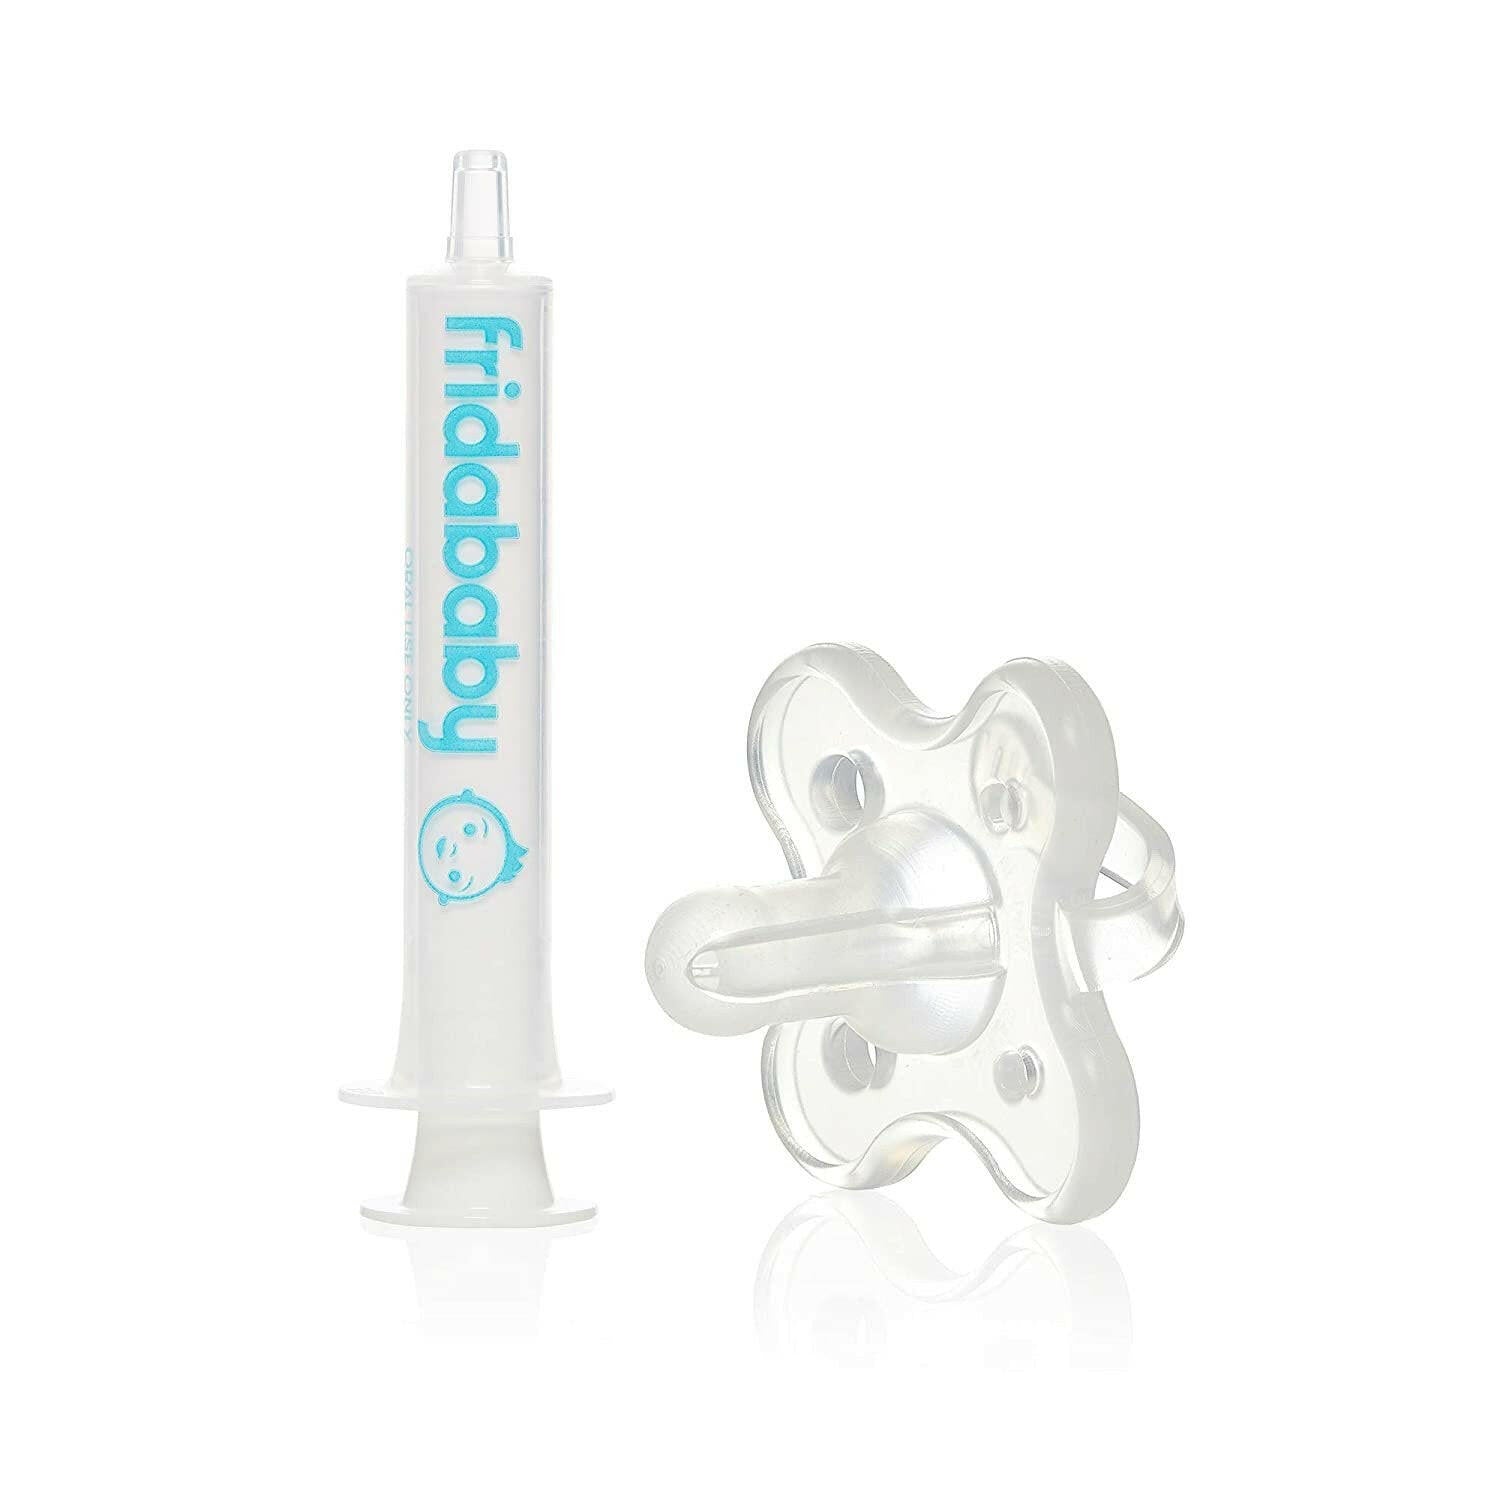 MediFrida the Accu-Dose Pacifier Baby Medicine Dispenser by FridaBaby.